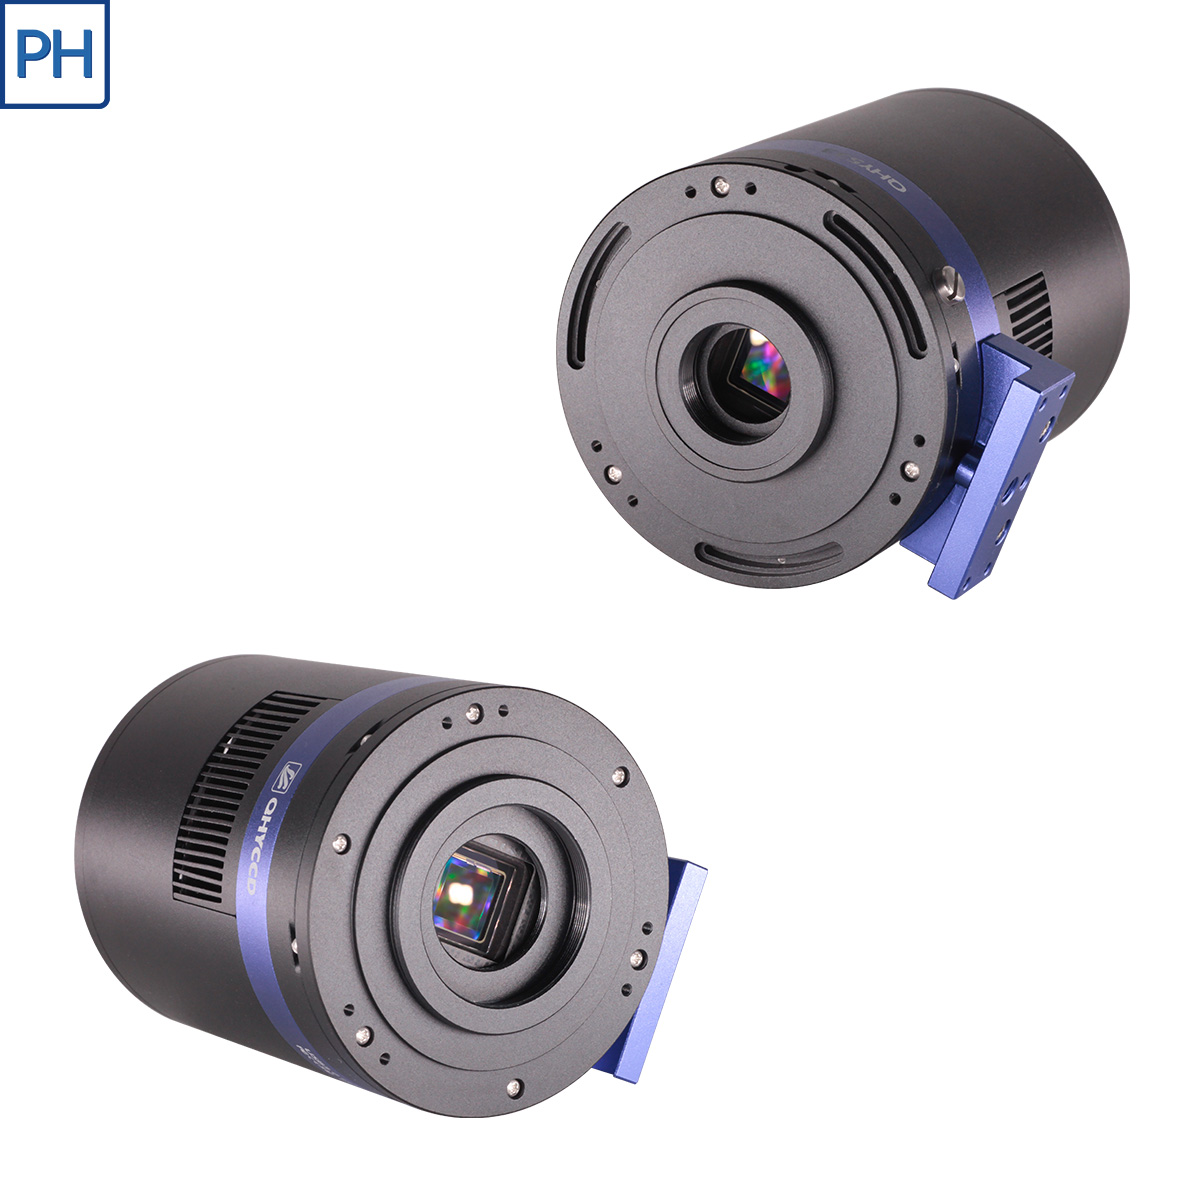 QHY533M/C Astronomy Cooled CMOS Camera IMX533